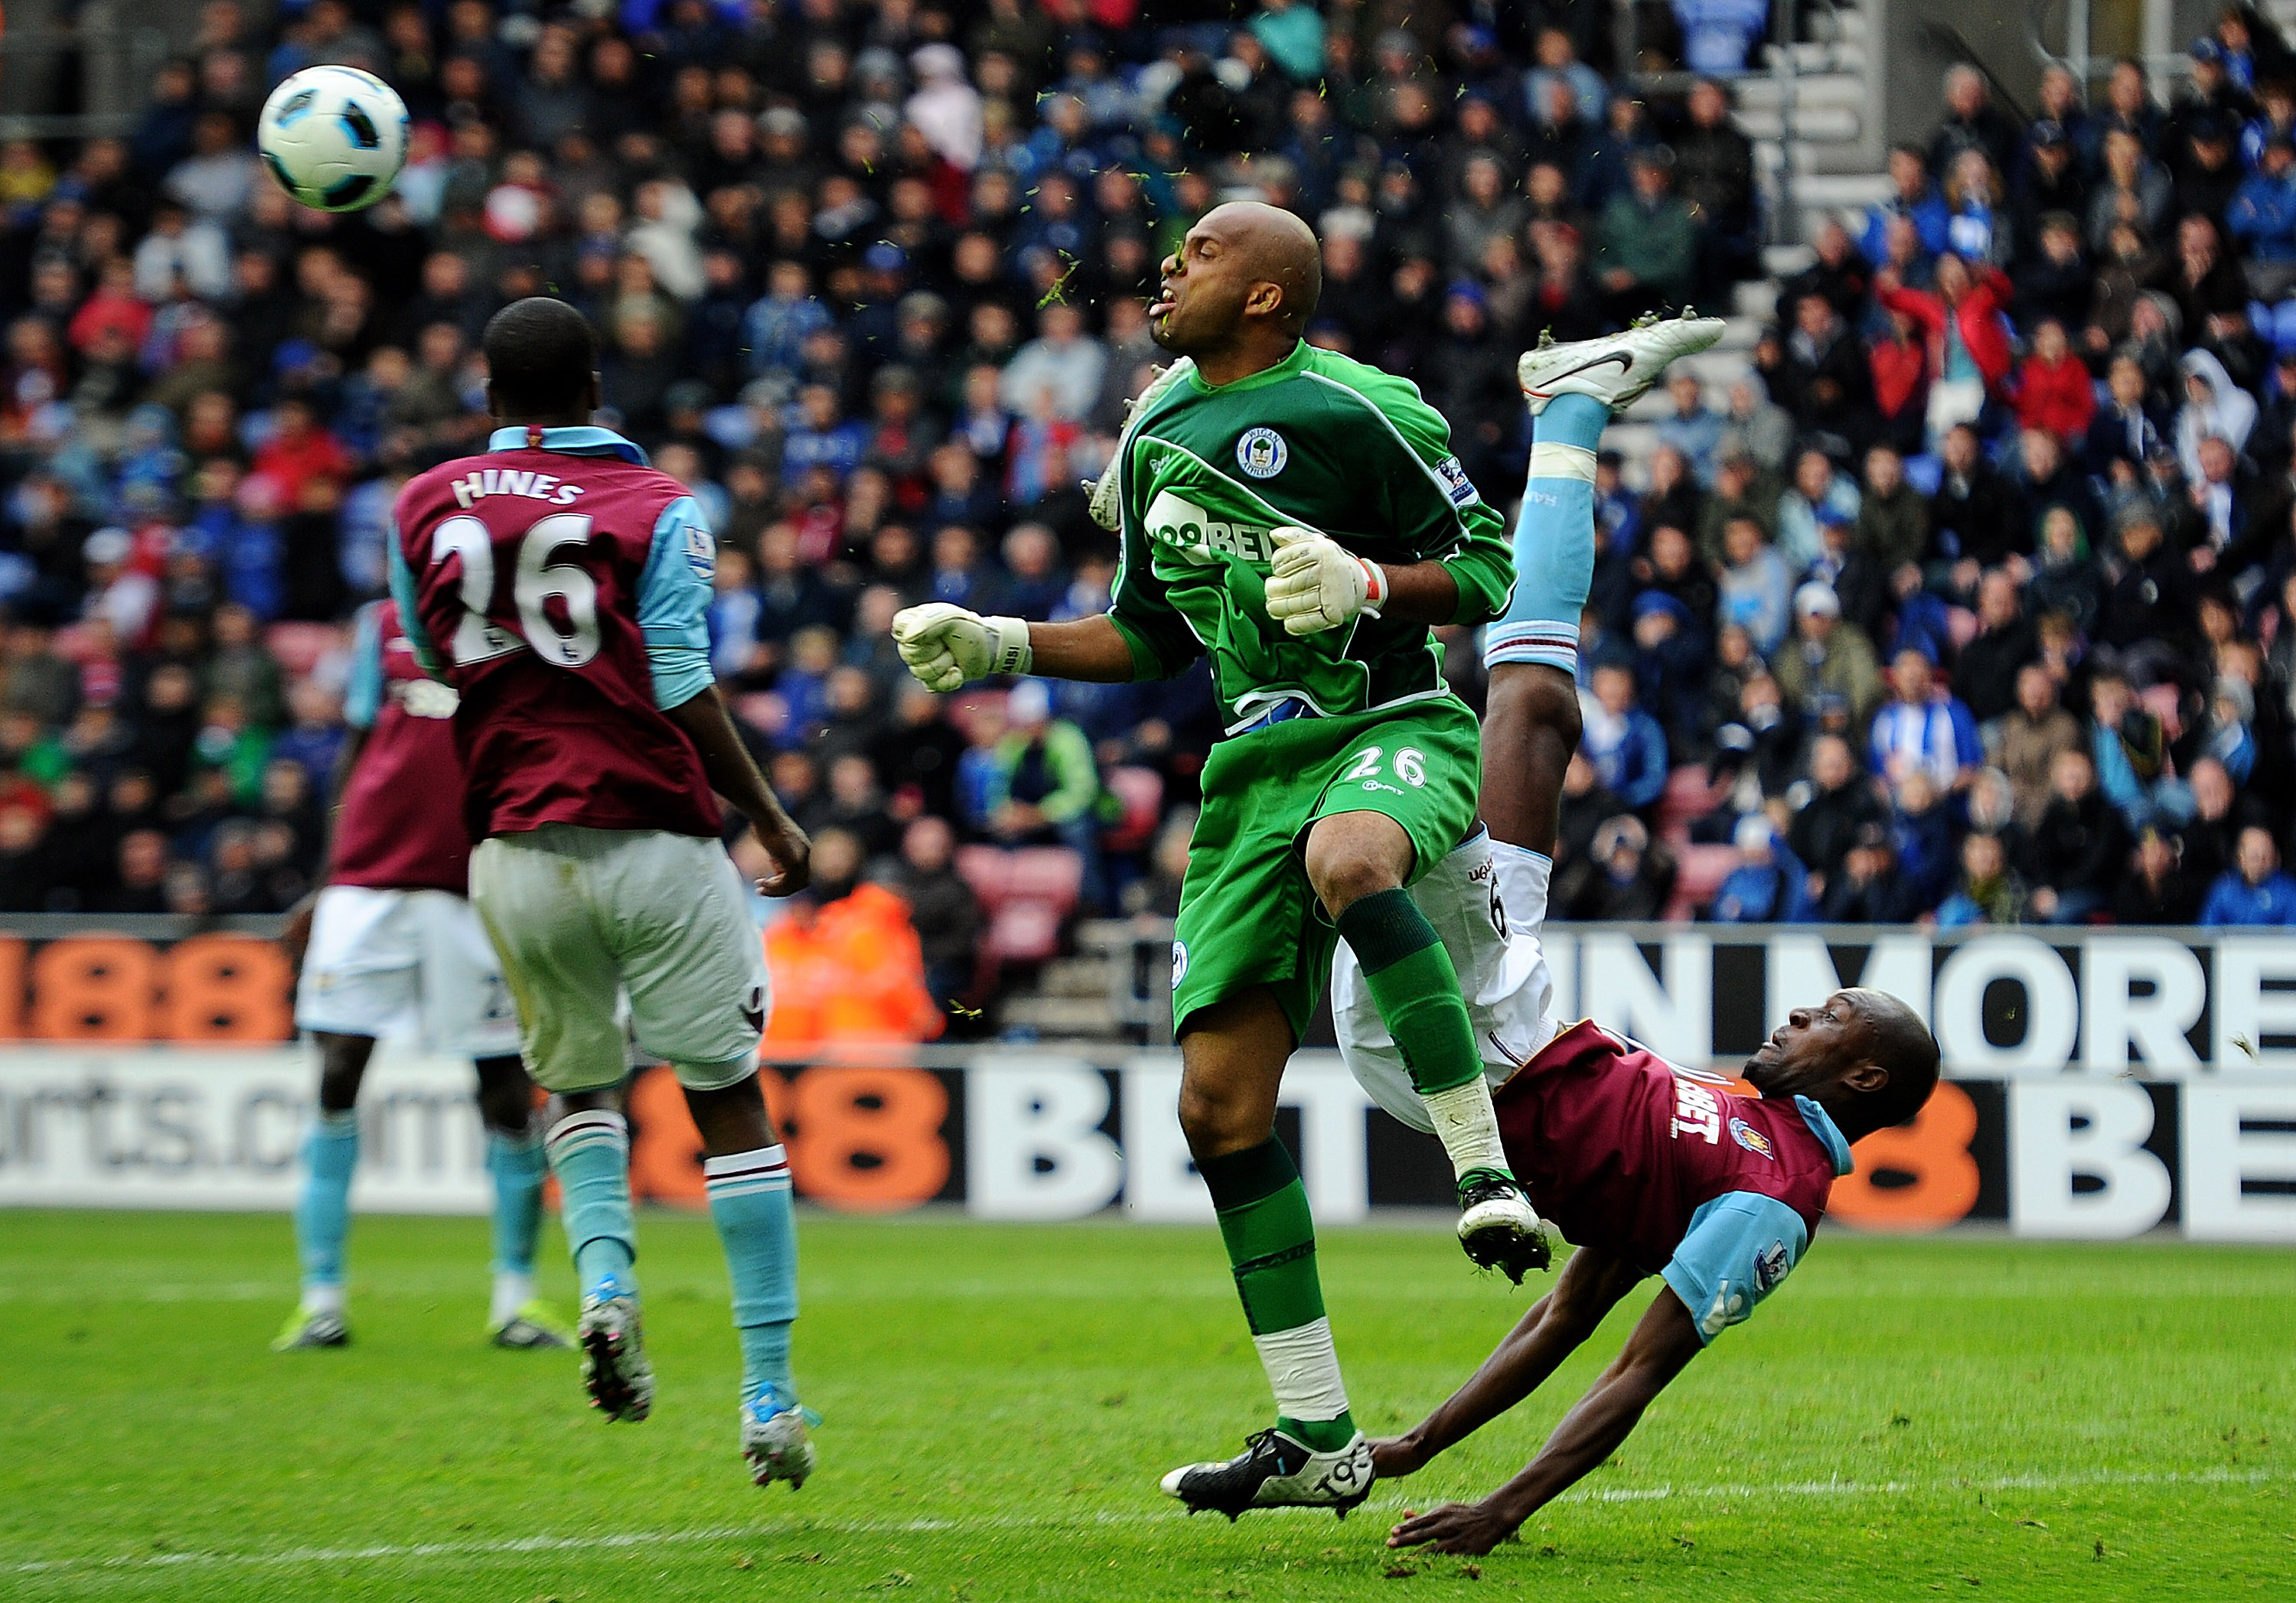 WIGAN, ENGLAND - MAY 15:  Ali Al Habsi of Wigan Athletic tangles with Carlton Cole of West Ham United during the Barclays Premier League match between Wigan Athletic and West Ham United at the DW Stadium on May 15, 2011 in Wigan, England.  (Photo by Clive